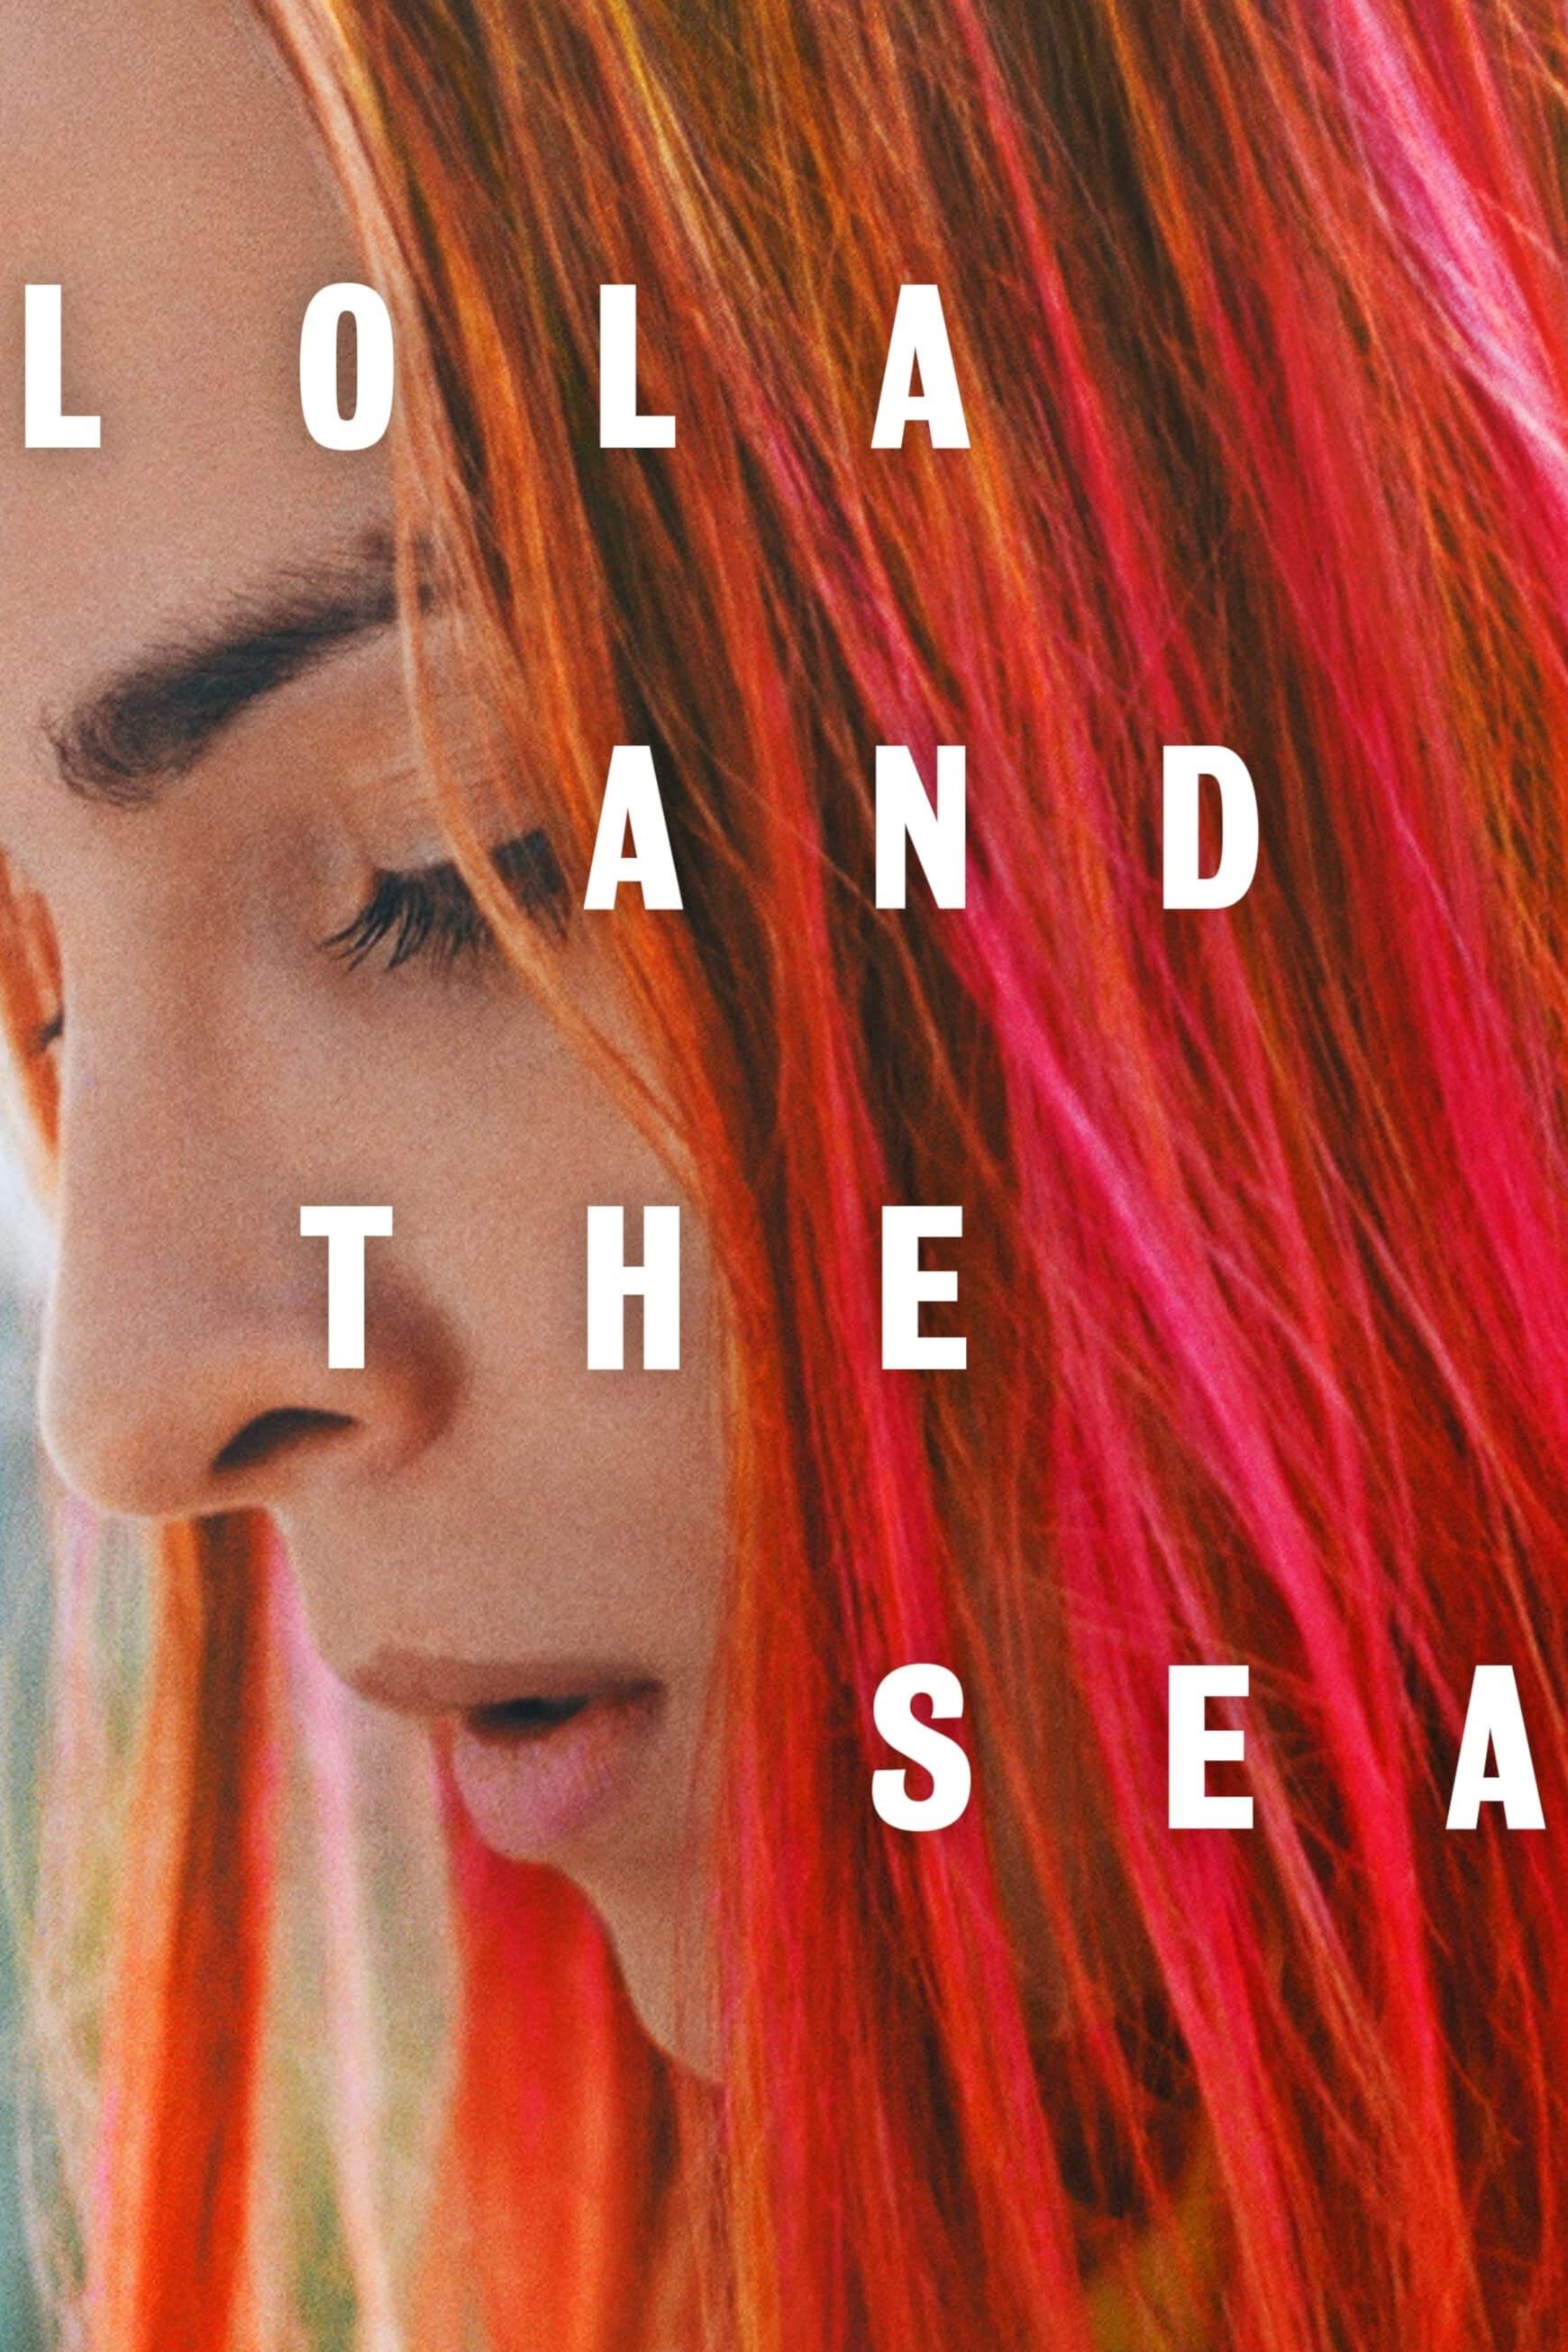 Lola and the Sea poster